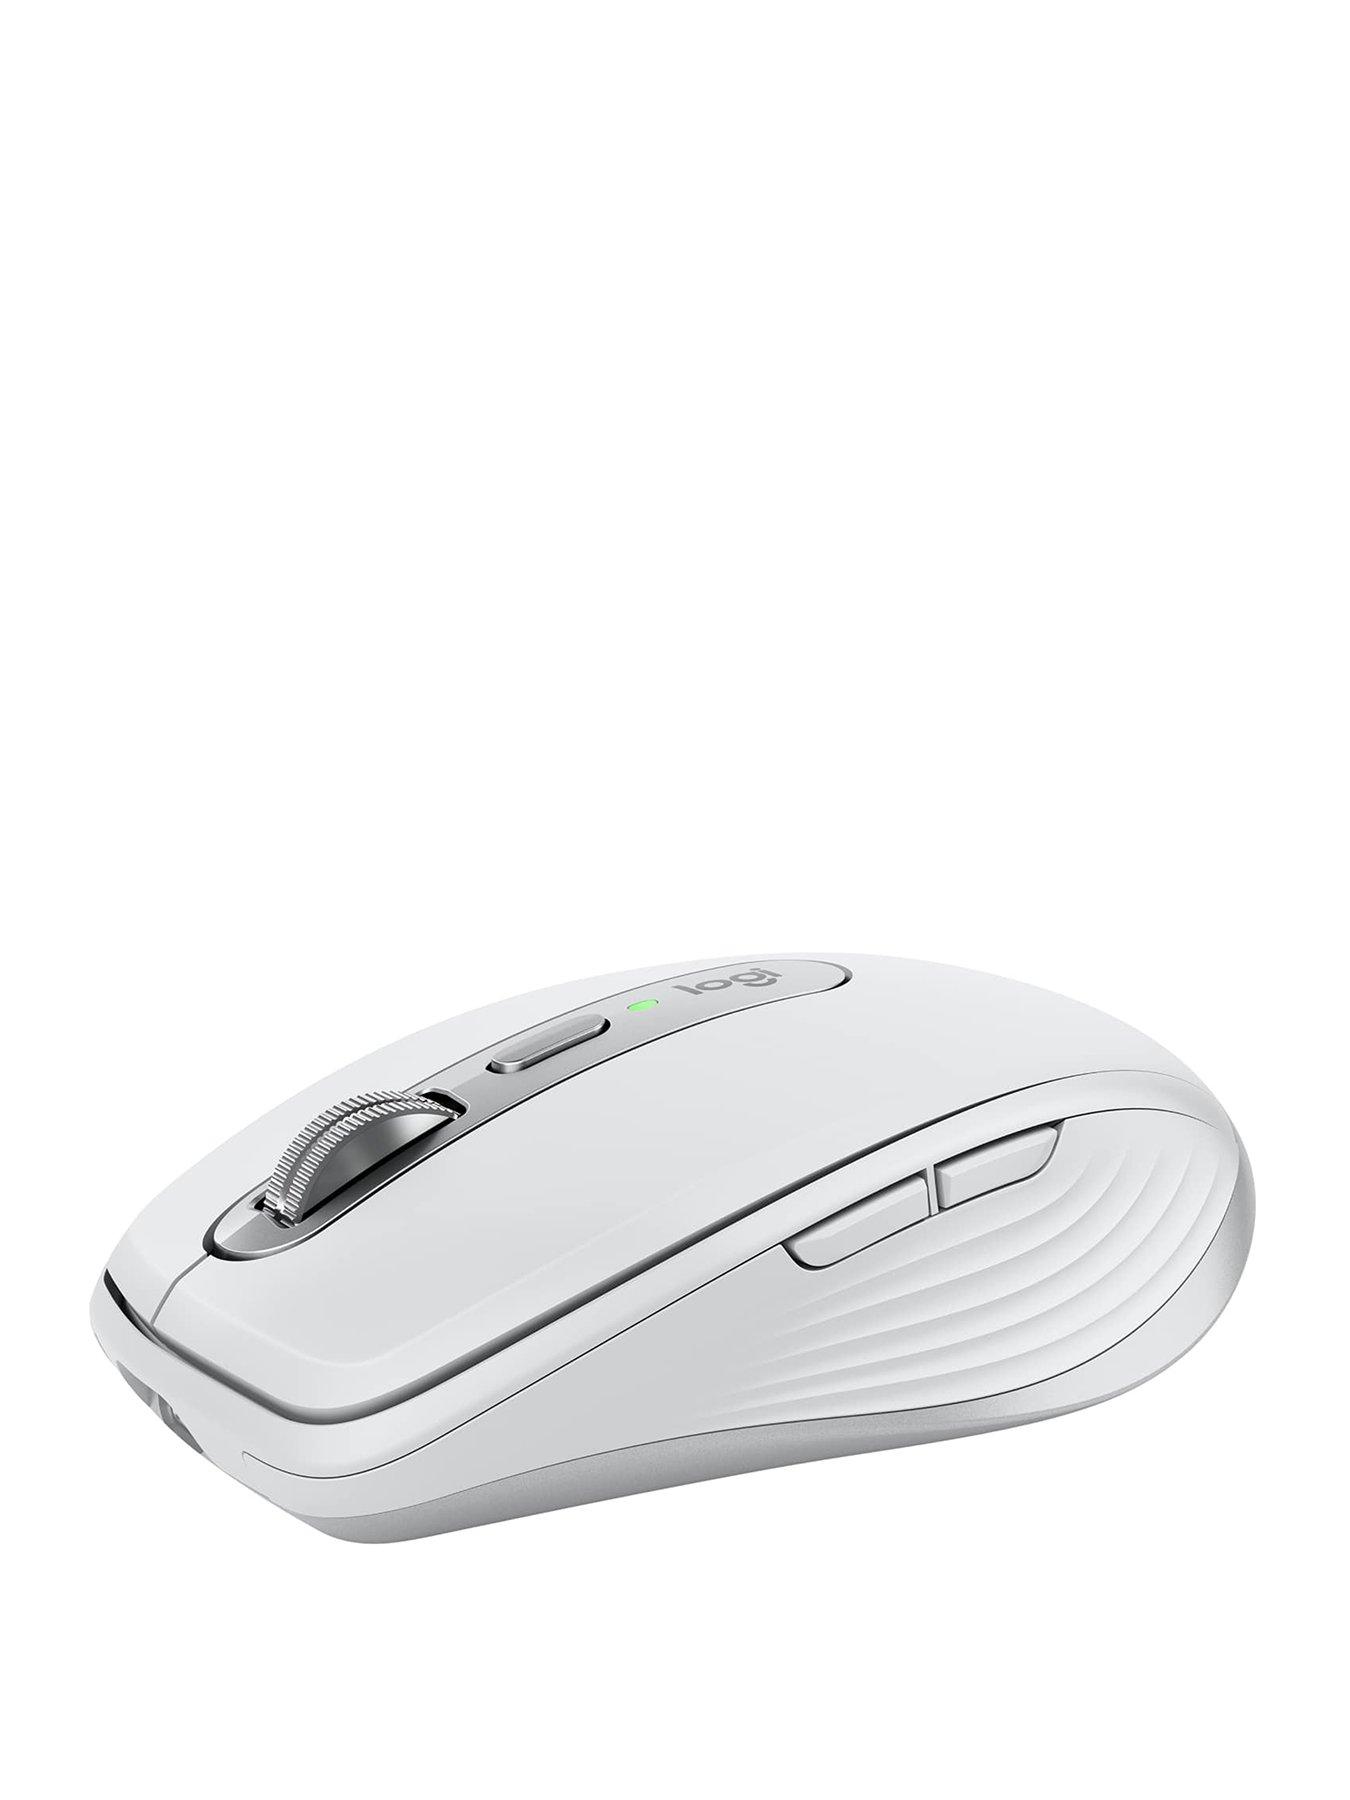 Logitech's wireless mouse ``MX ANYWHERE 3S'' setup review, which